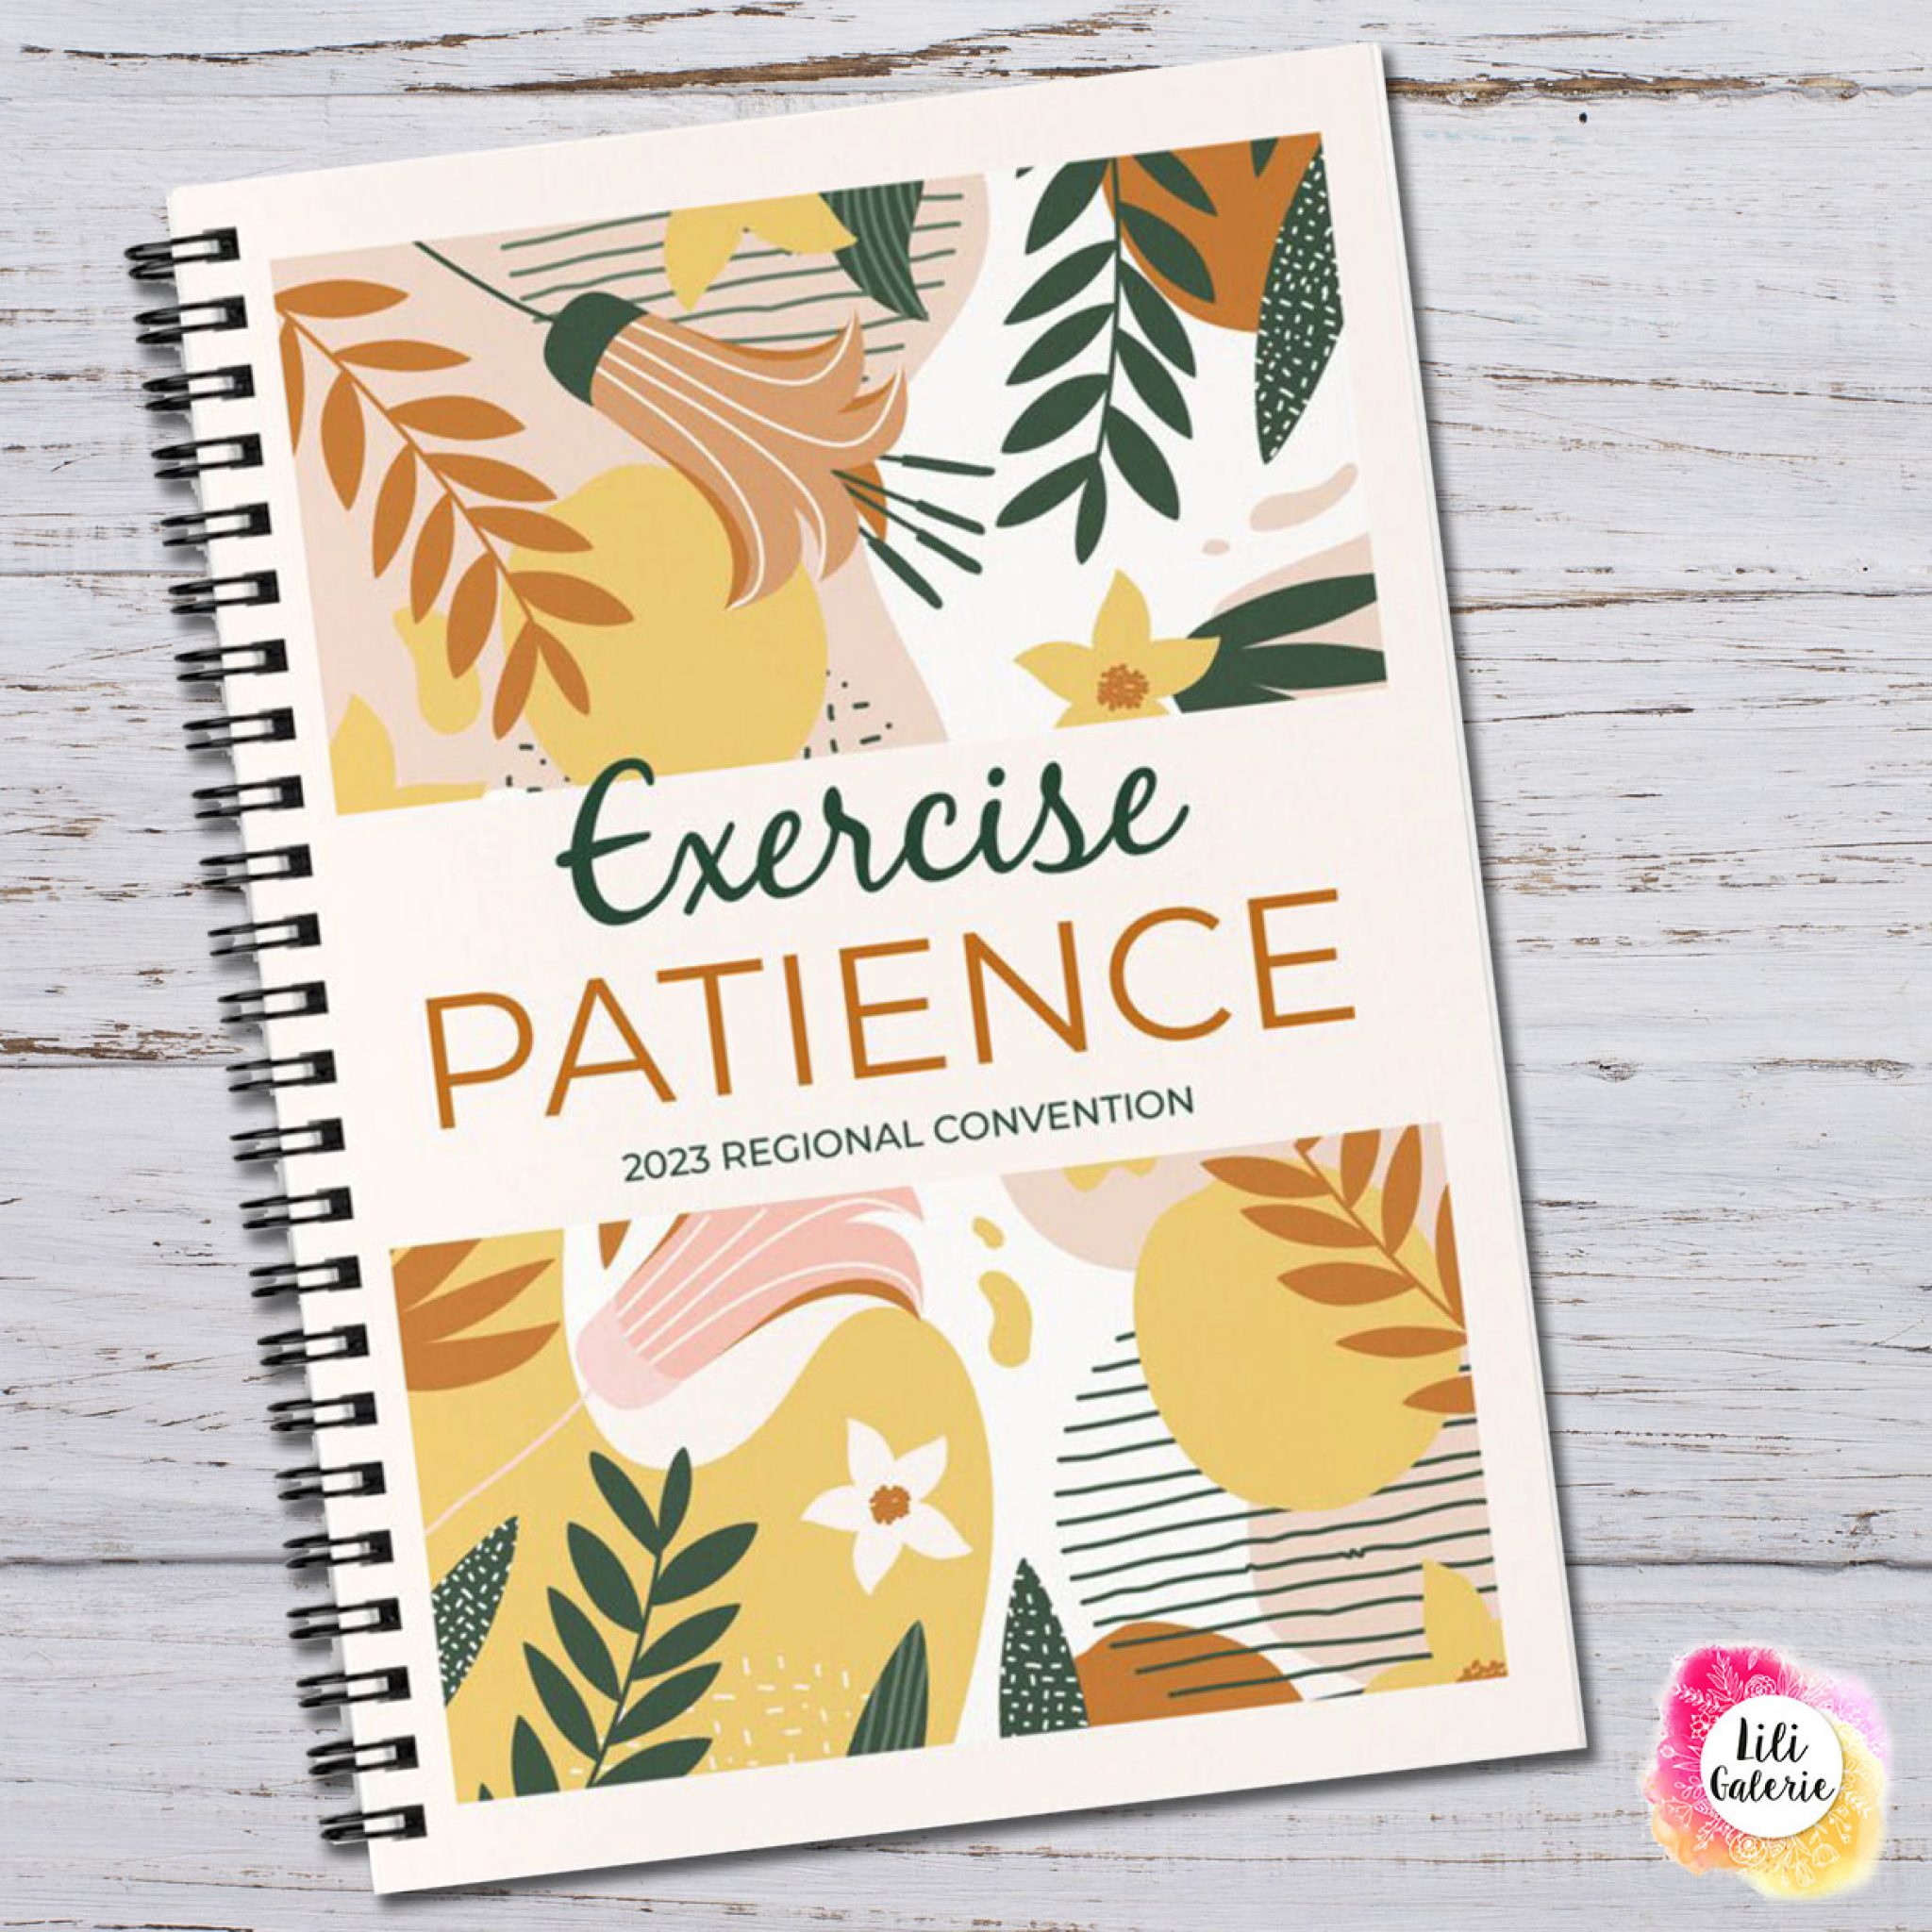 Convention Notebook “Exercise Patience” 2023 JW Digital print I